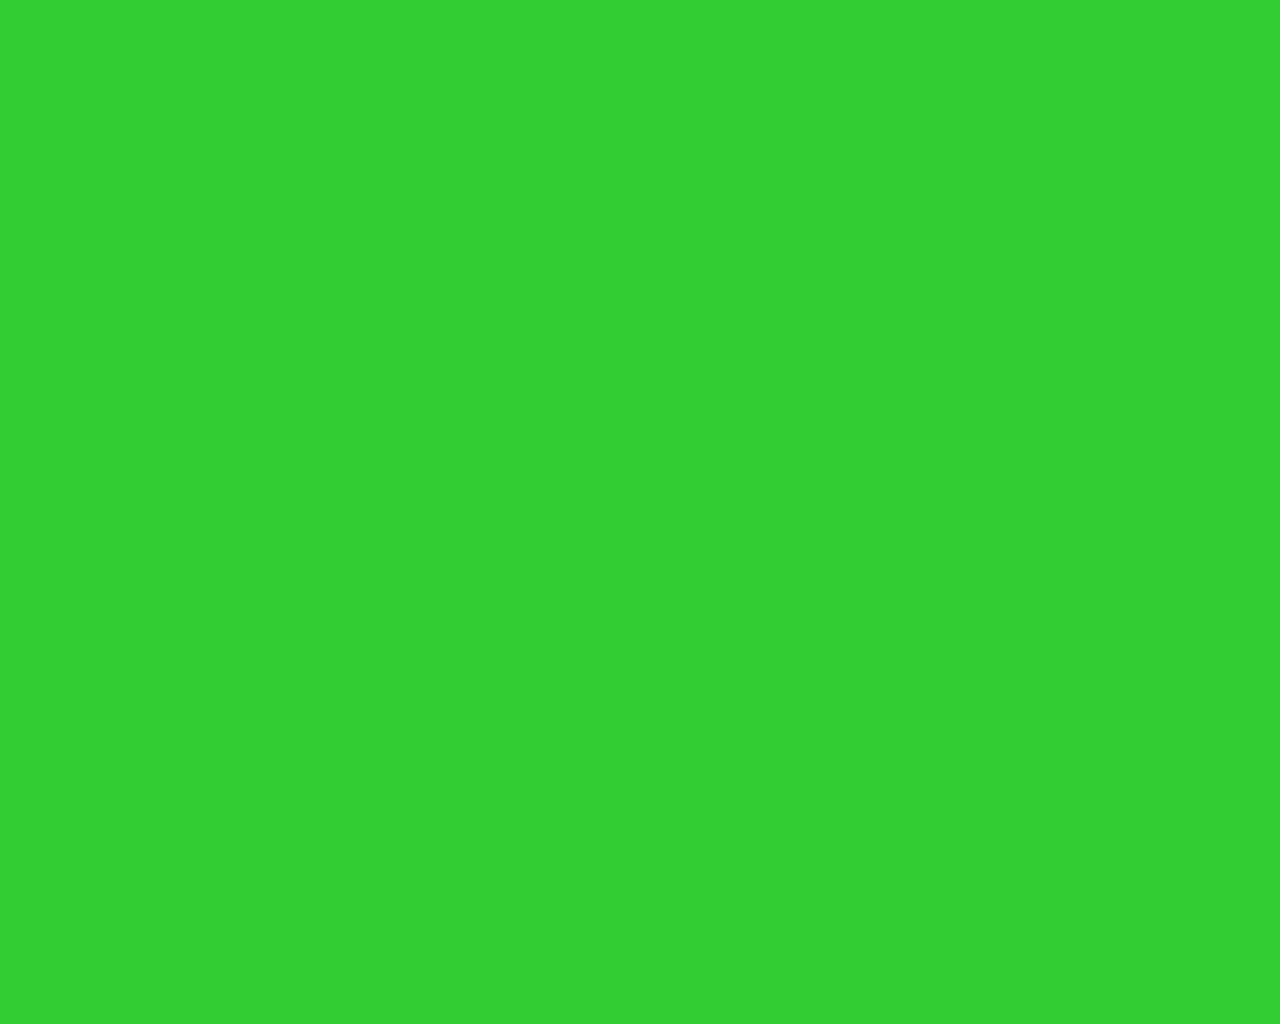 Solid Green Background Images  Free Download on Freepik